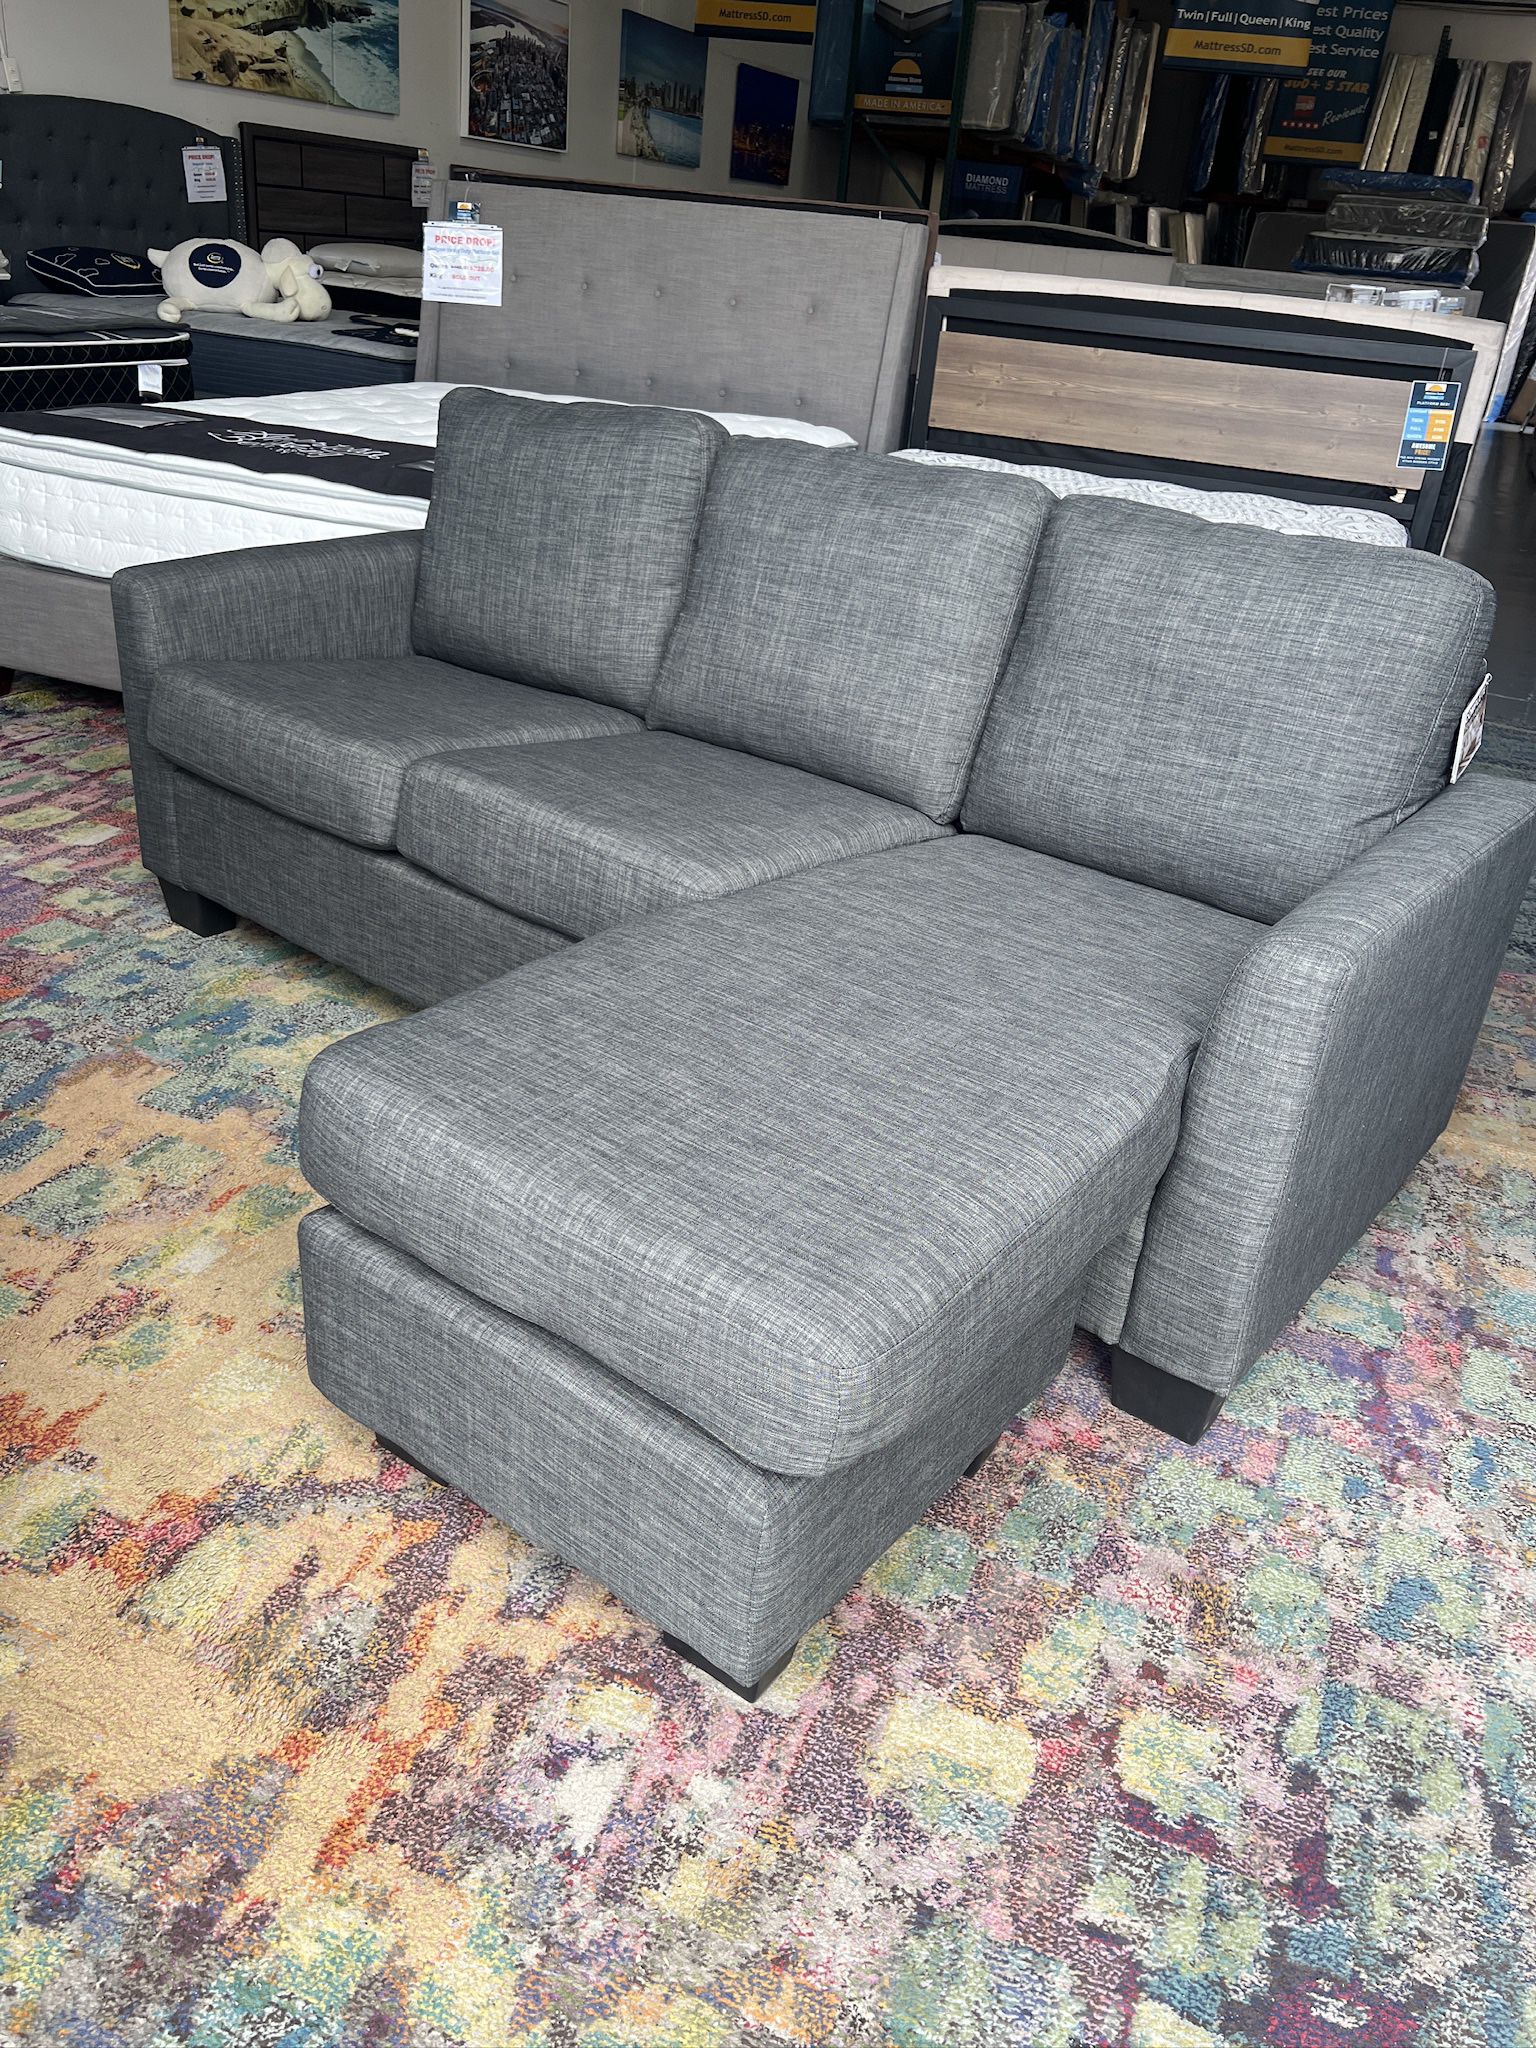 REDUCED ! 2 Left Only ! BRAND NEW! Charcoal Sectional With Reversible Chaise Great price